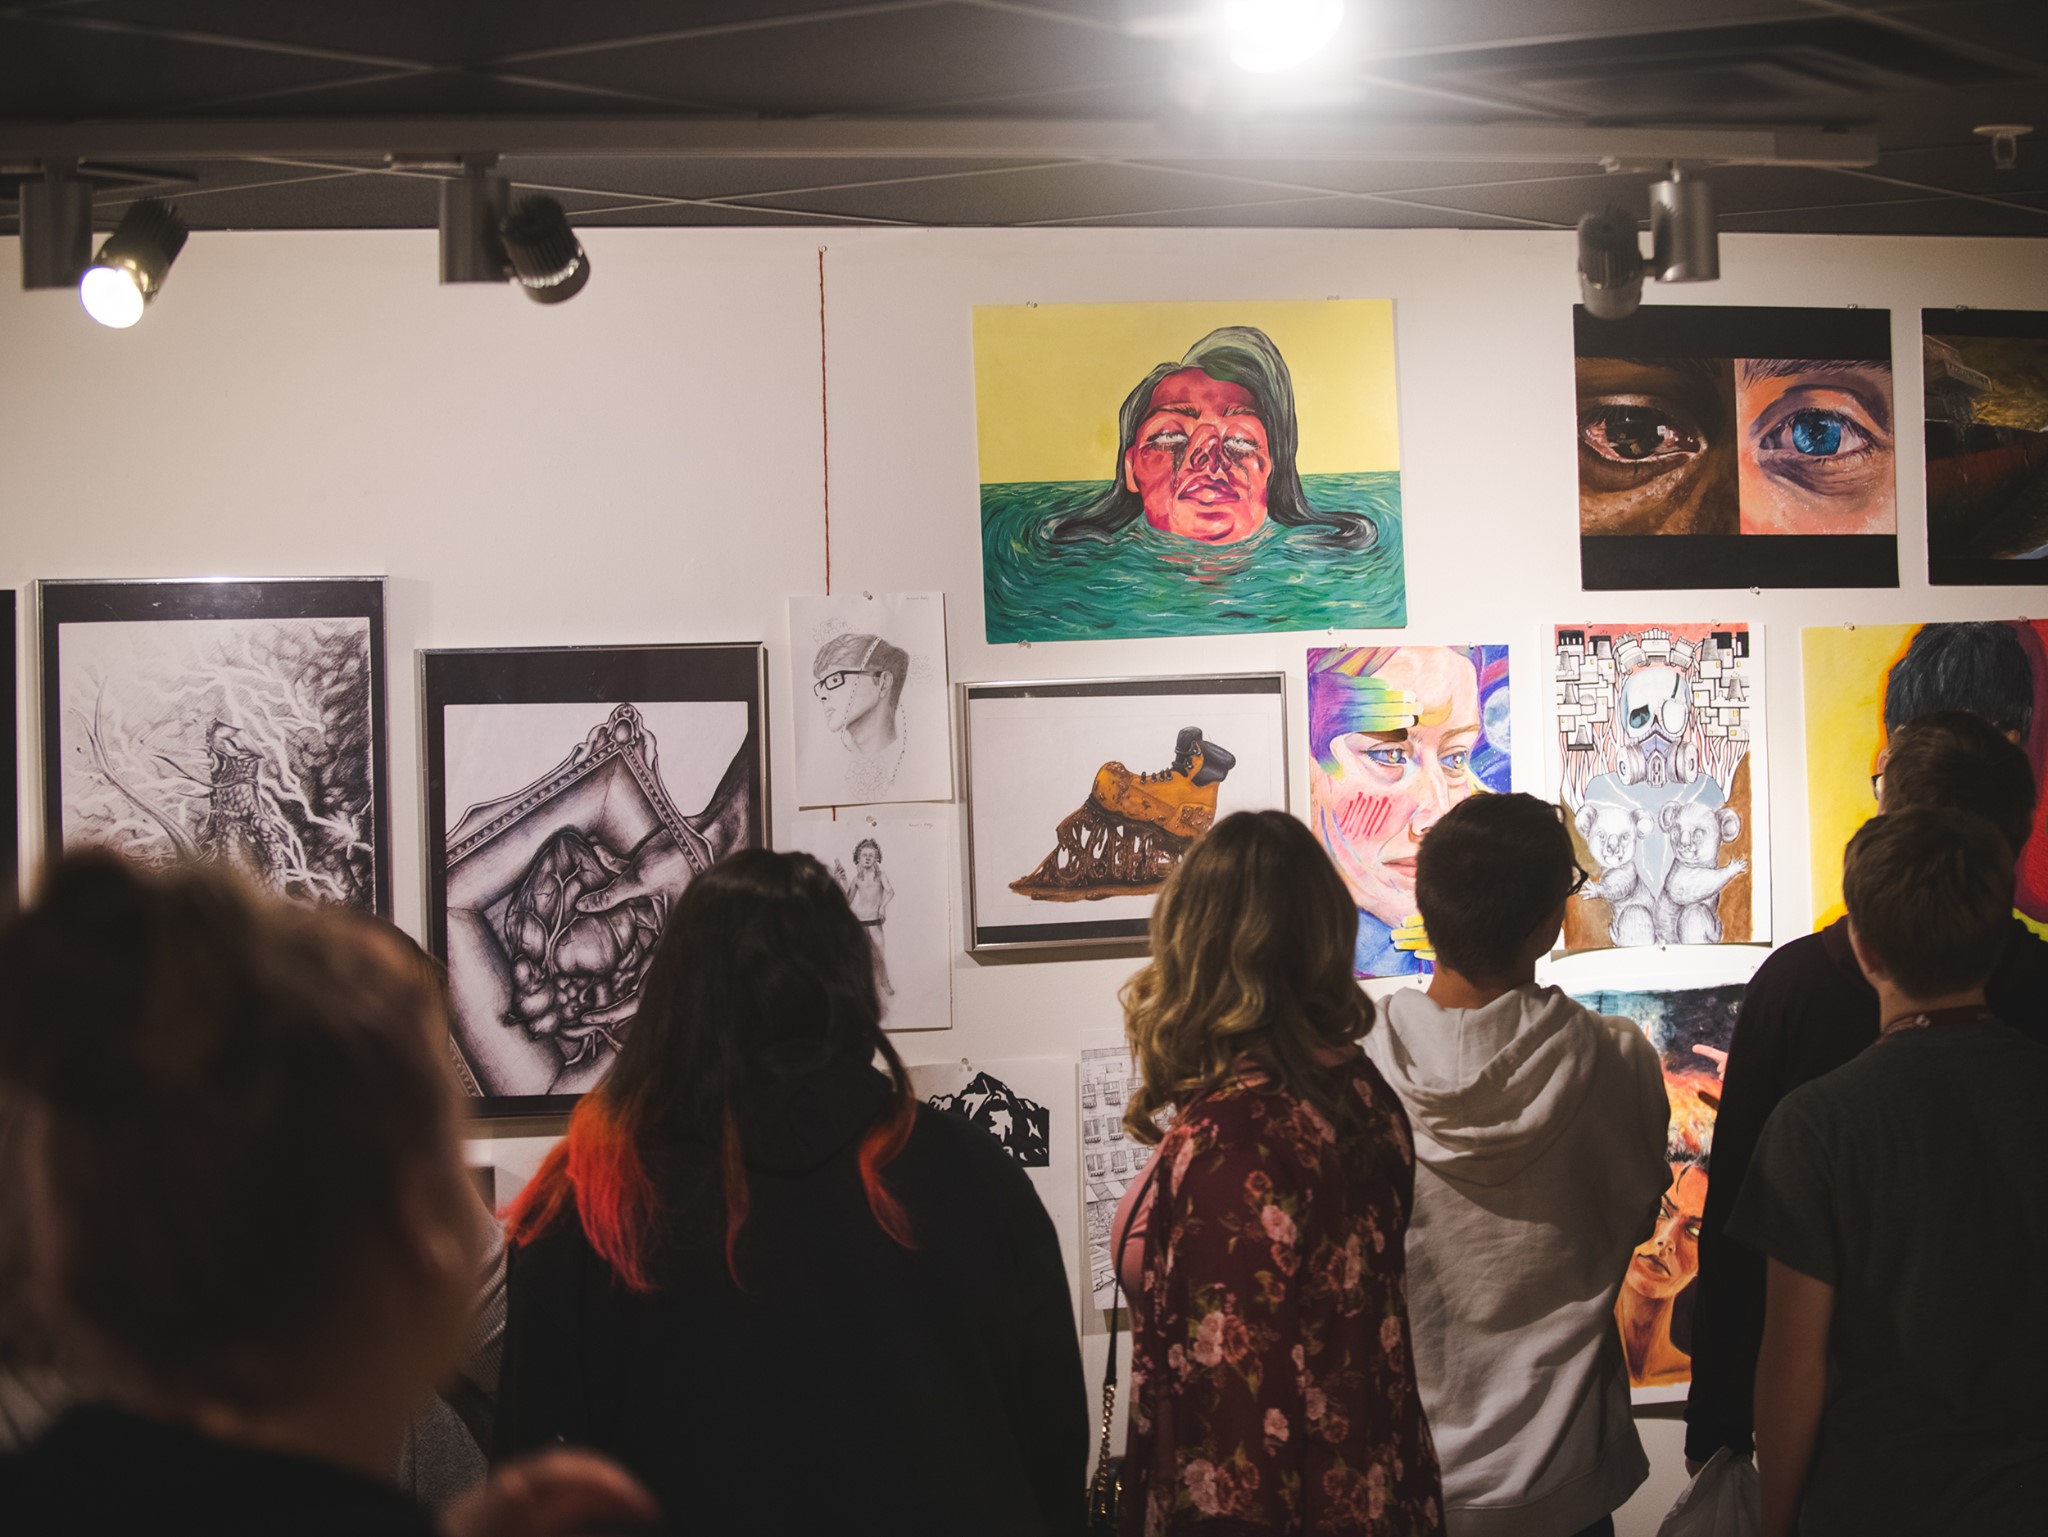 A group of spectators examine student artwork, hanging on a gallery wall